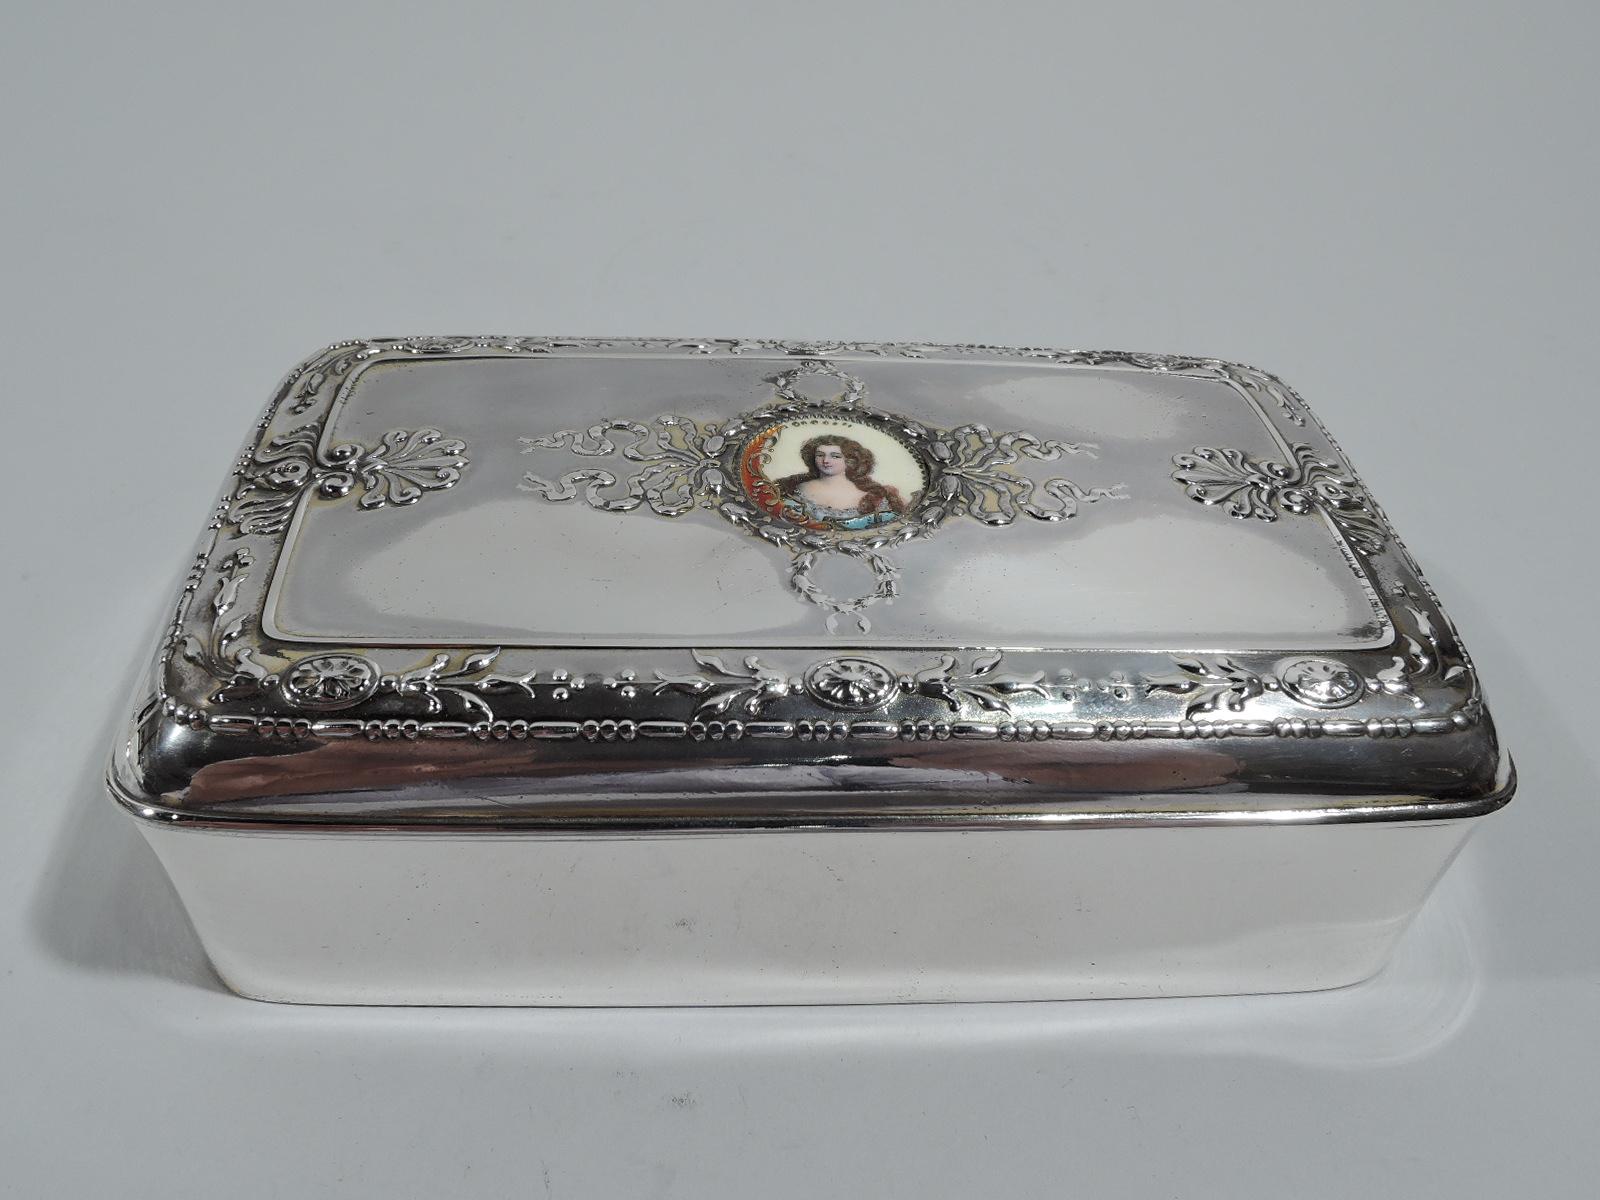 Edwardian Regency sterling silver jewelry box. Made by Gorham in Providence in 1896. Rectangular with curved corners. Cover hinged and raised with central enamel medallion depicting Baroque beauty with beaded border and set in wreath and ribbon